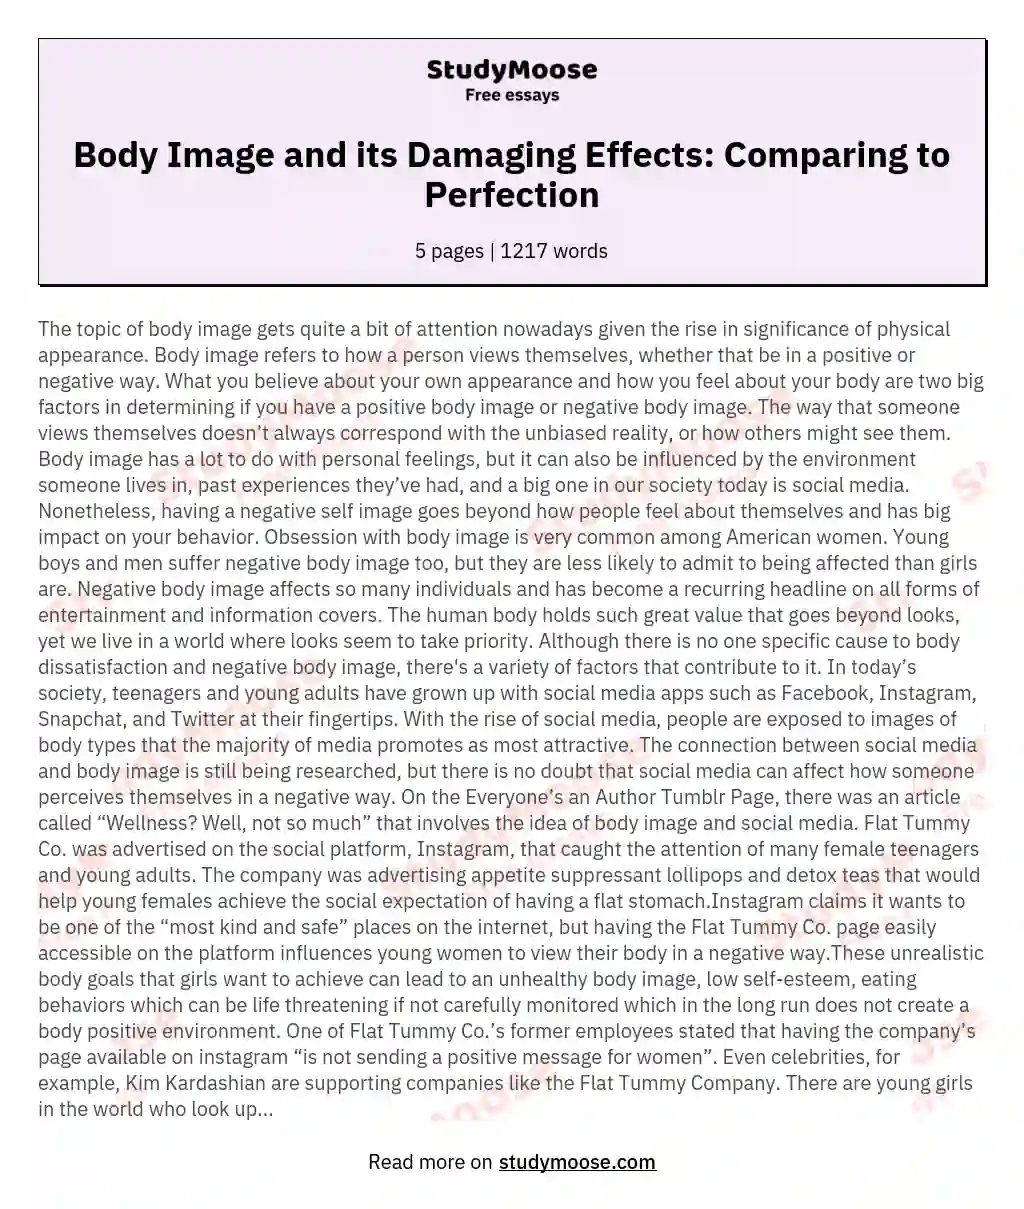 Body Image and its Damaging Effects: Comparing to Perfection essay